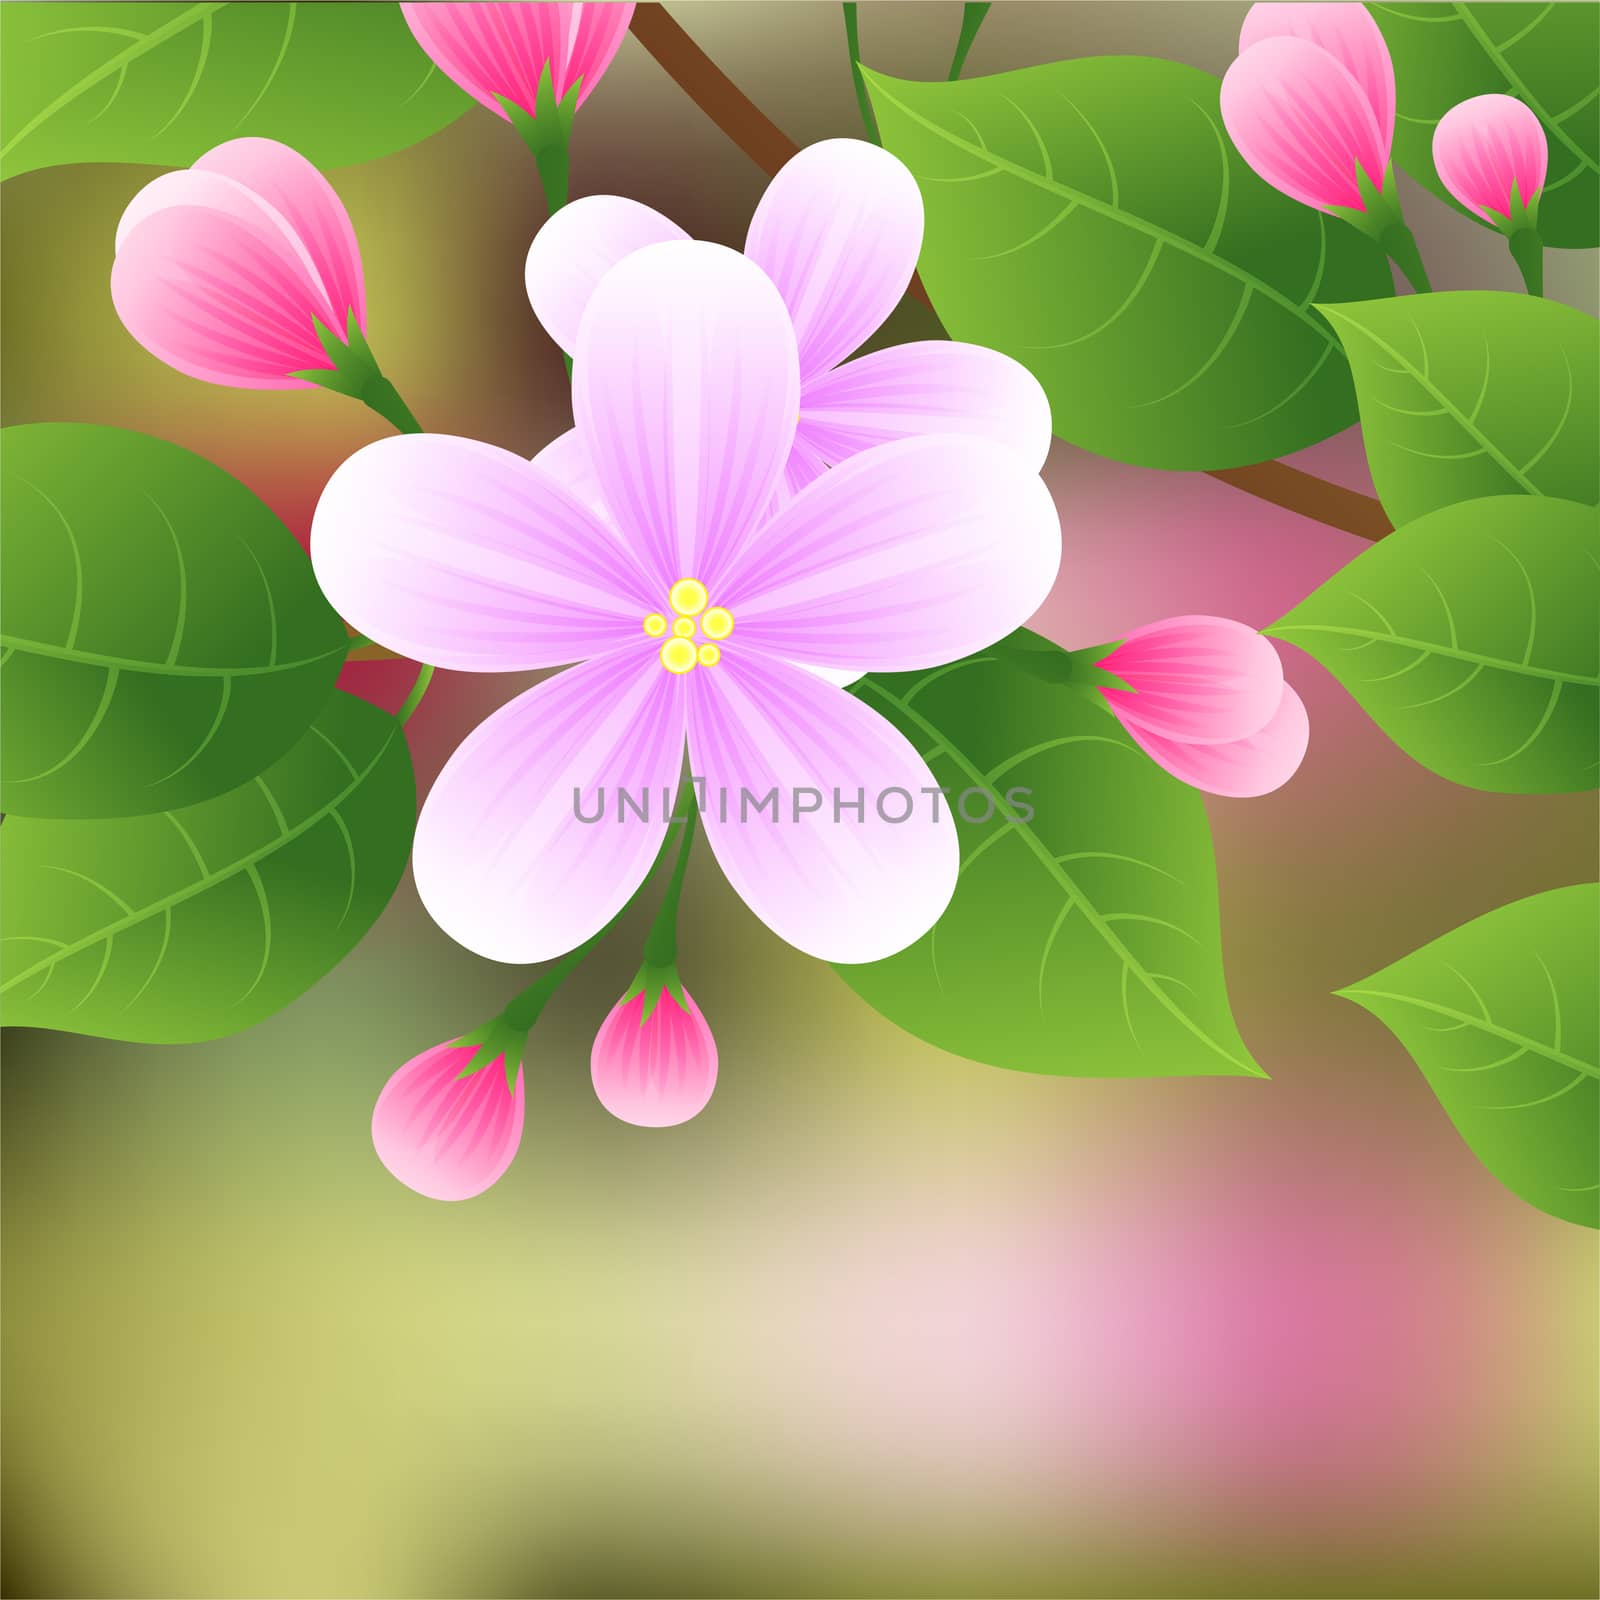 Blossoming apple tree branch with pink flowers. illustration